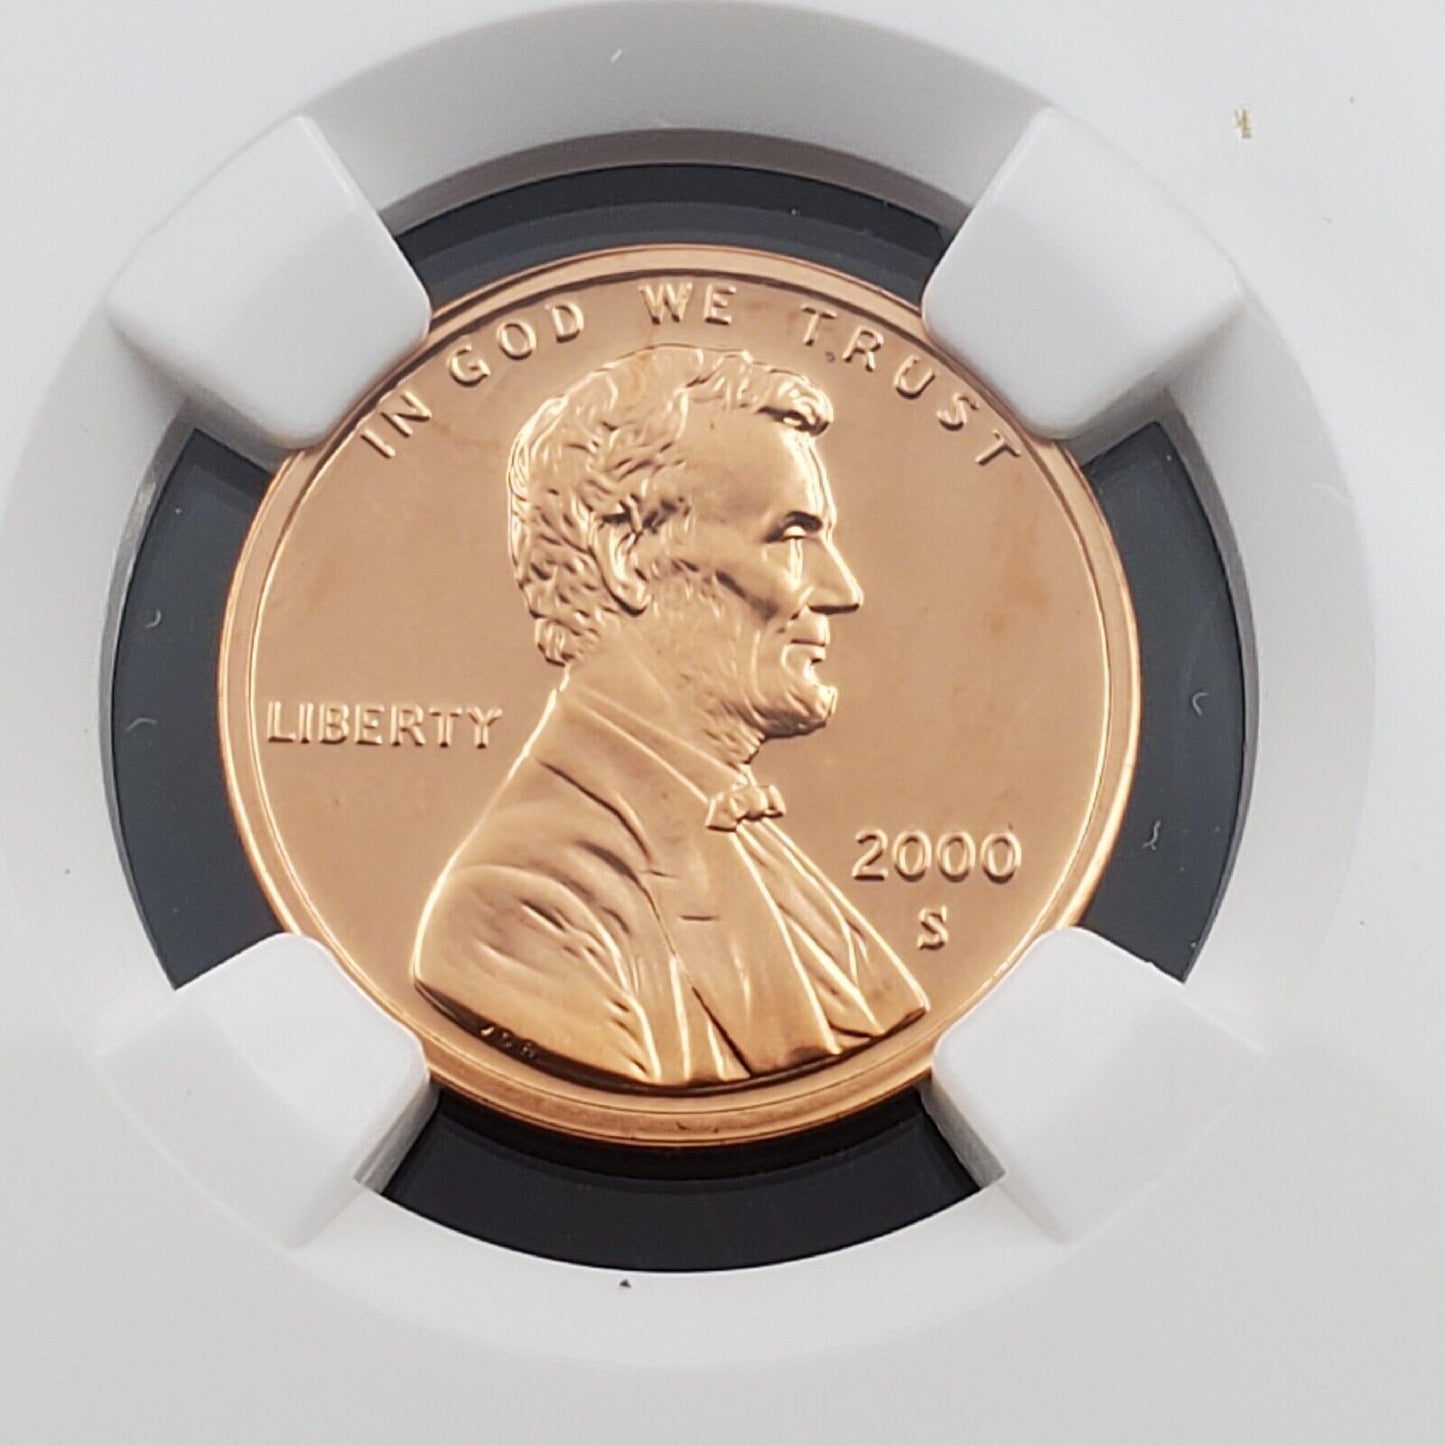 2000 S Lincoln Memorial Cent Penny coin 1c PF69 RD NGC Ultra Cameo UCAM